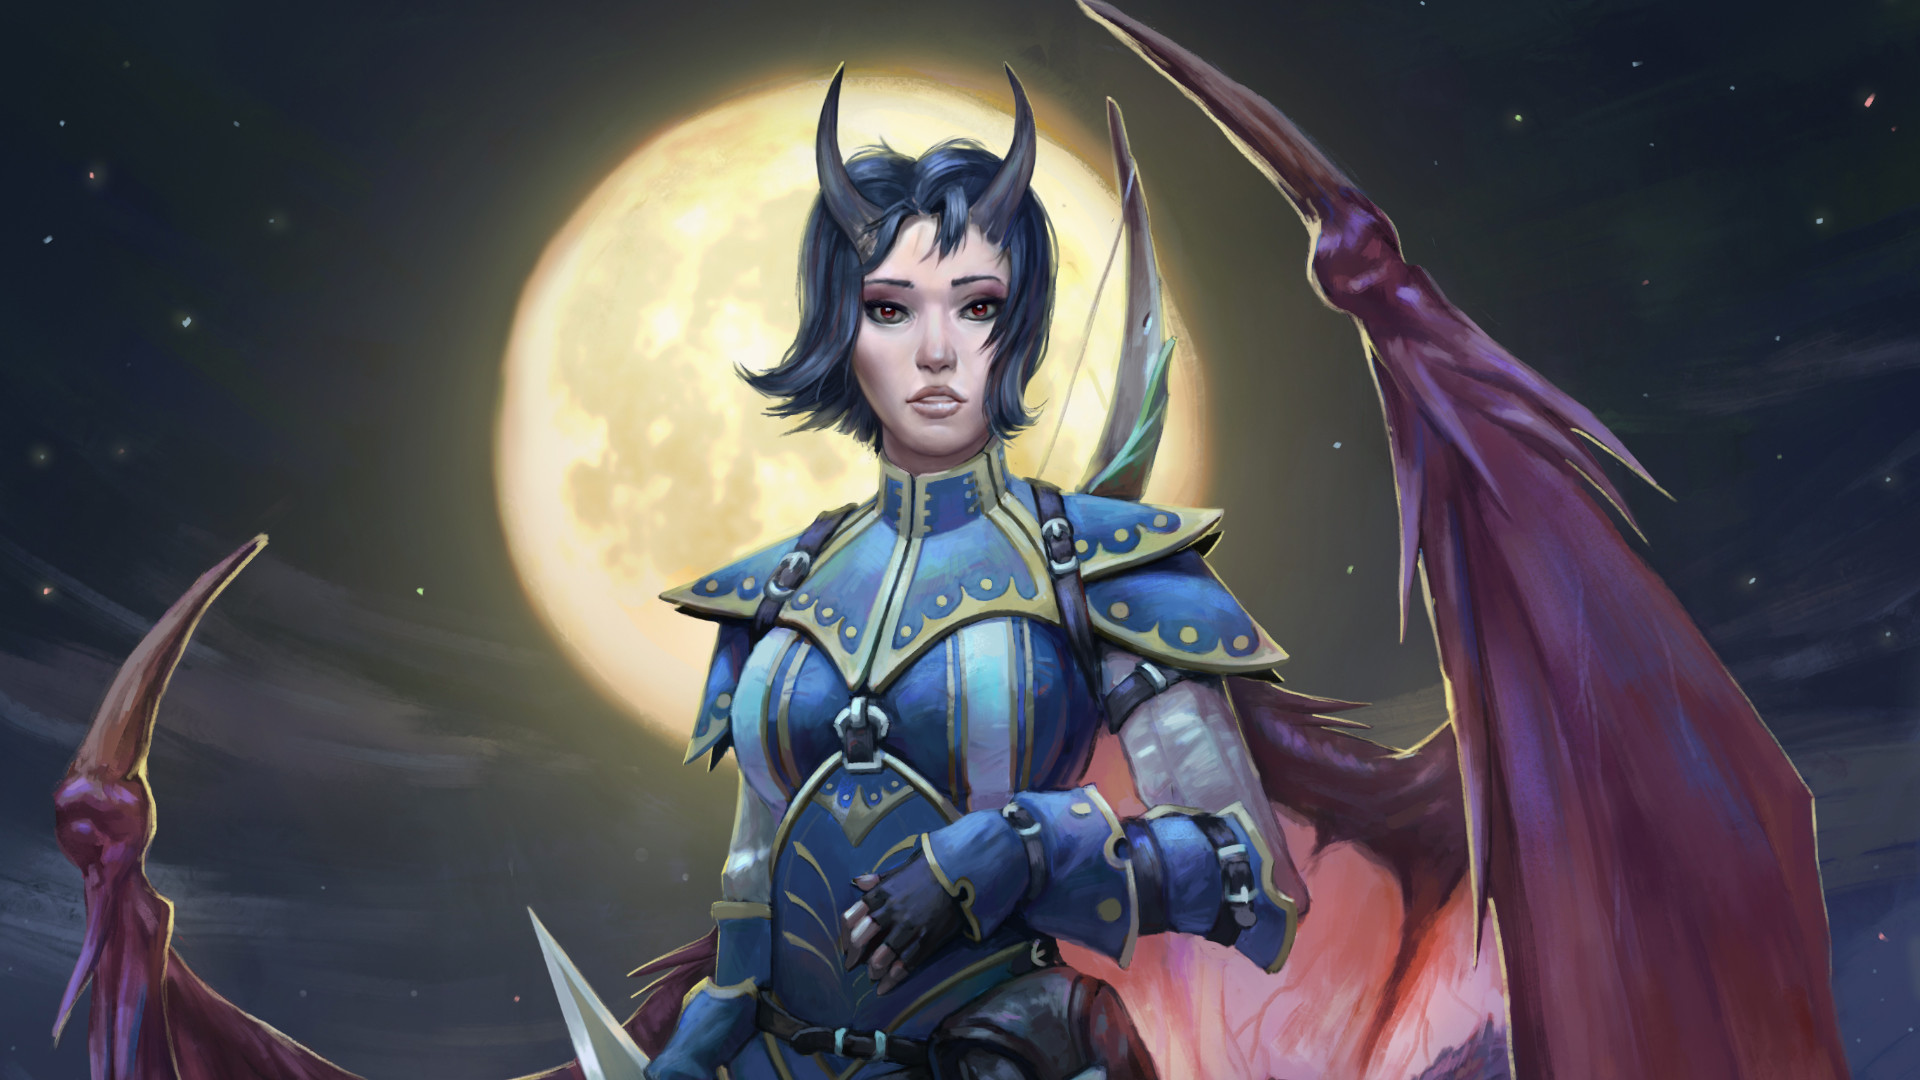 Pathfinder: Wrath of the Righteous HD wallpaper featuring an armored female character with a moonlit sky background.